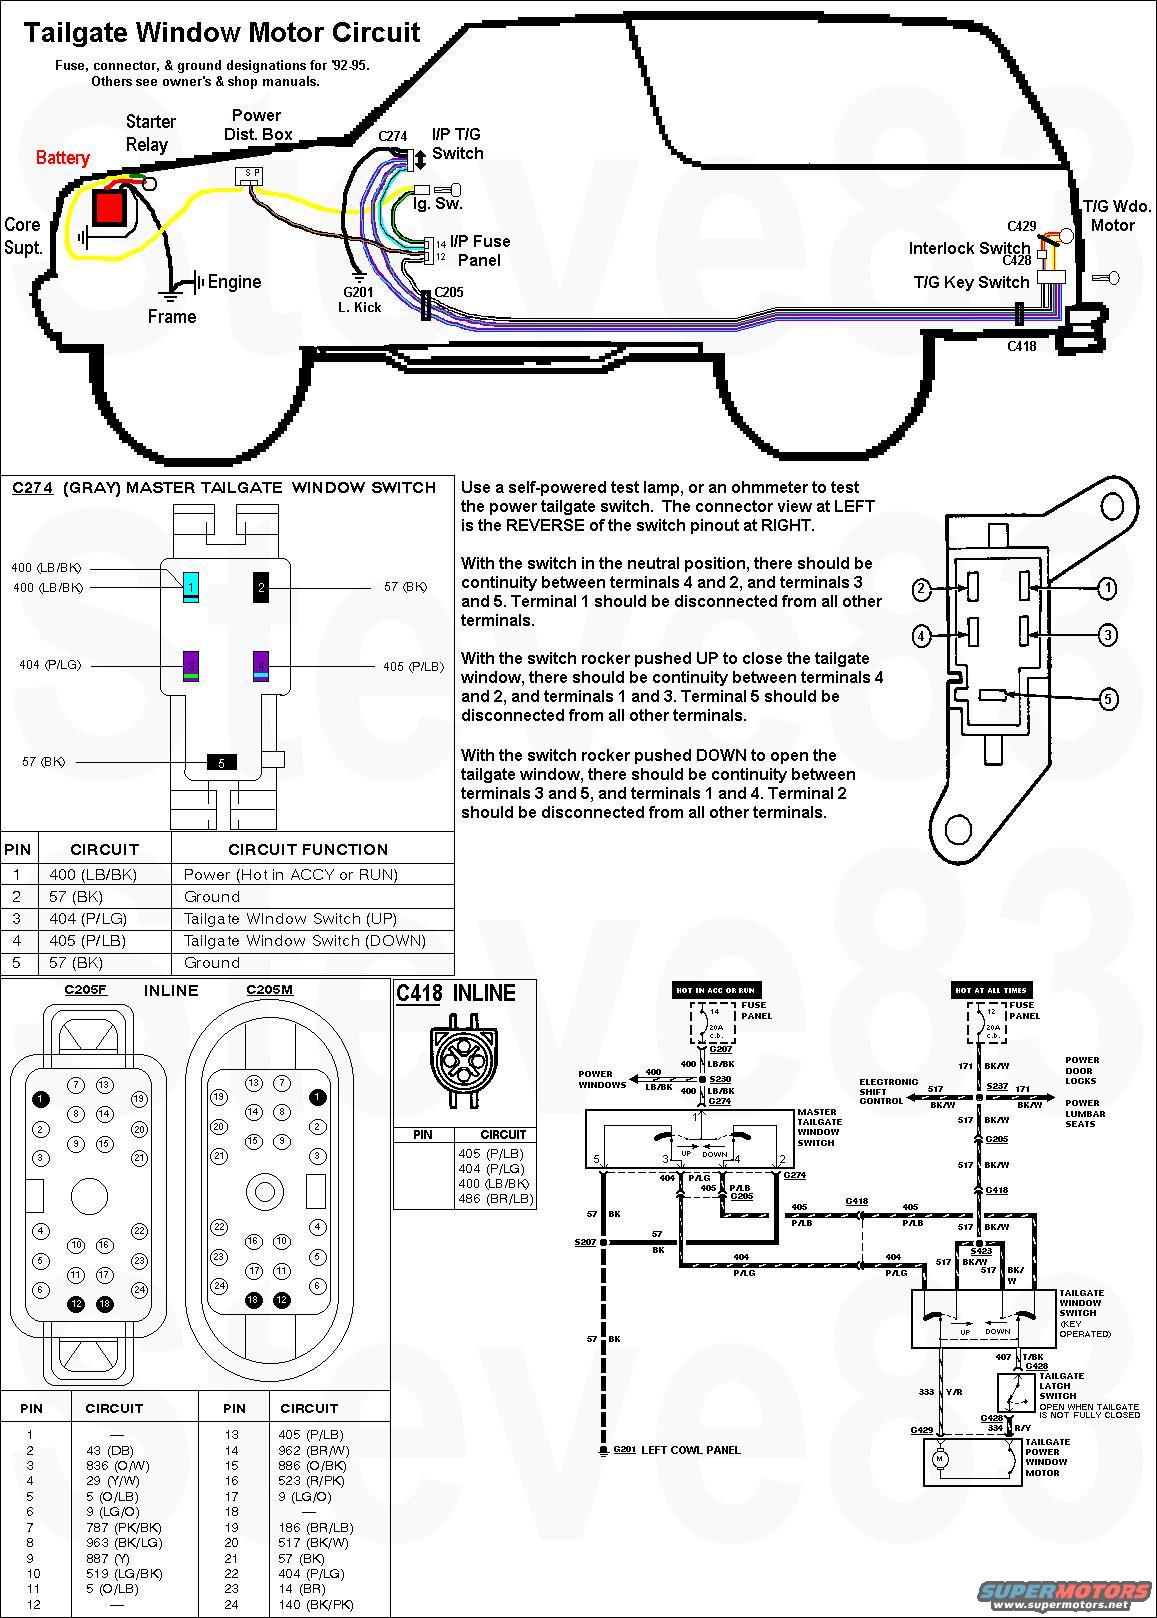 Wiring diagram for 85 ford bronco #6